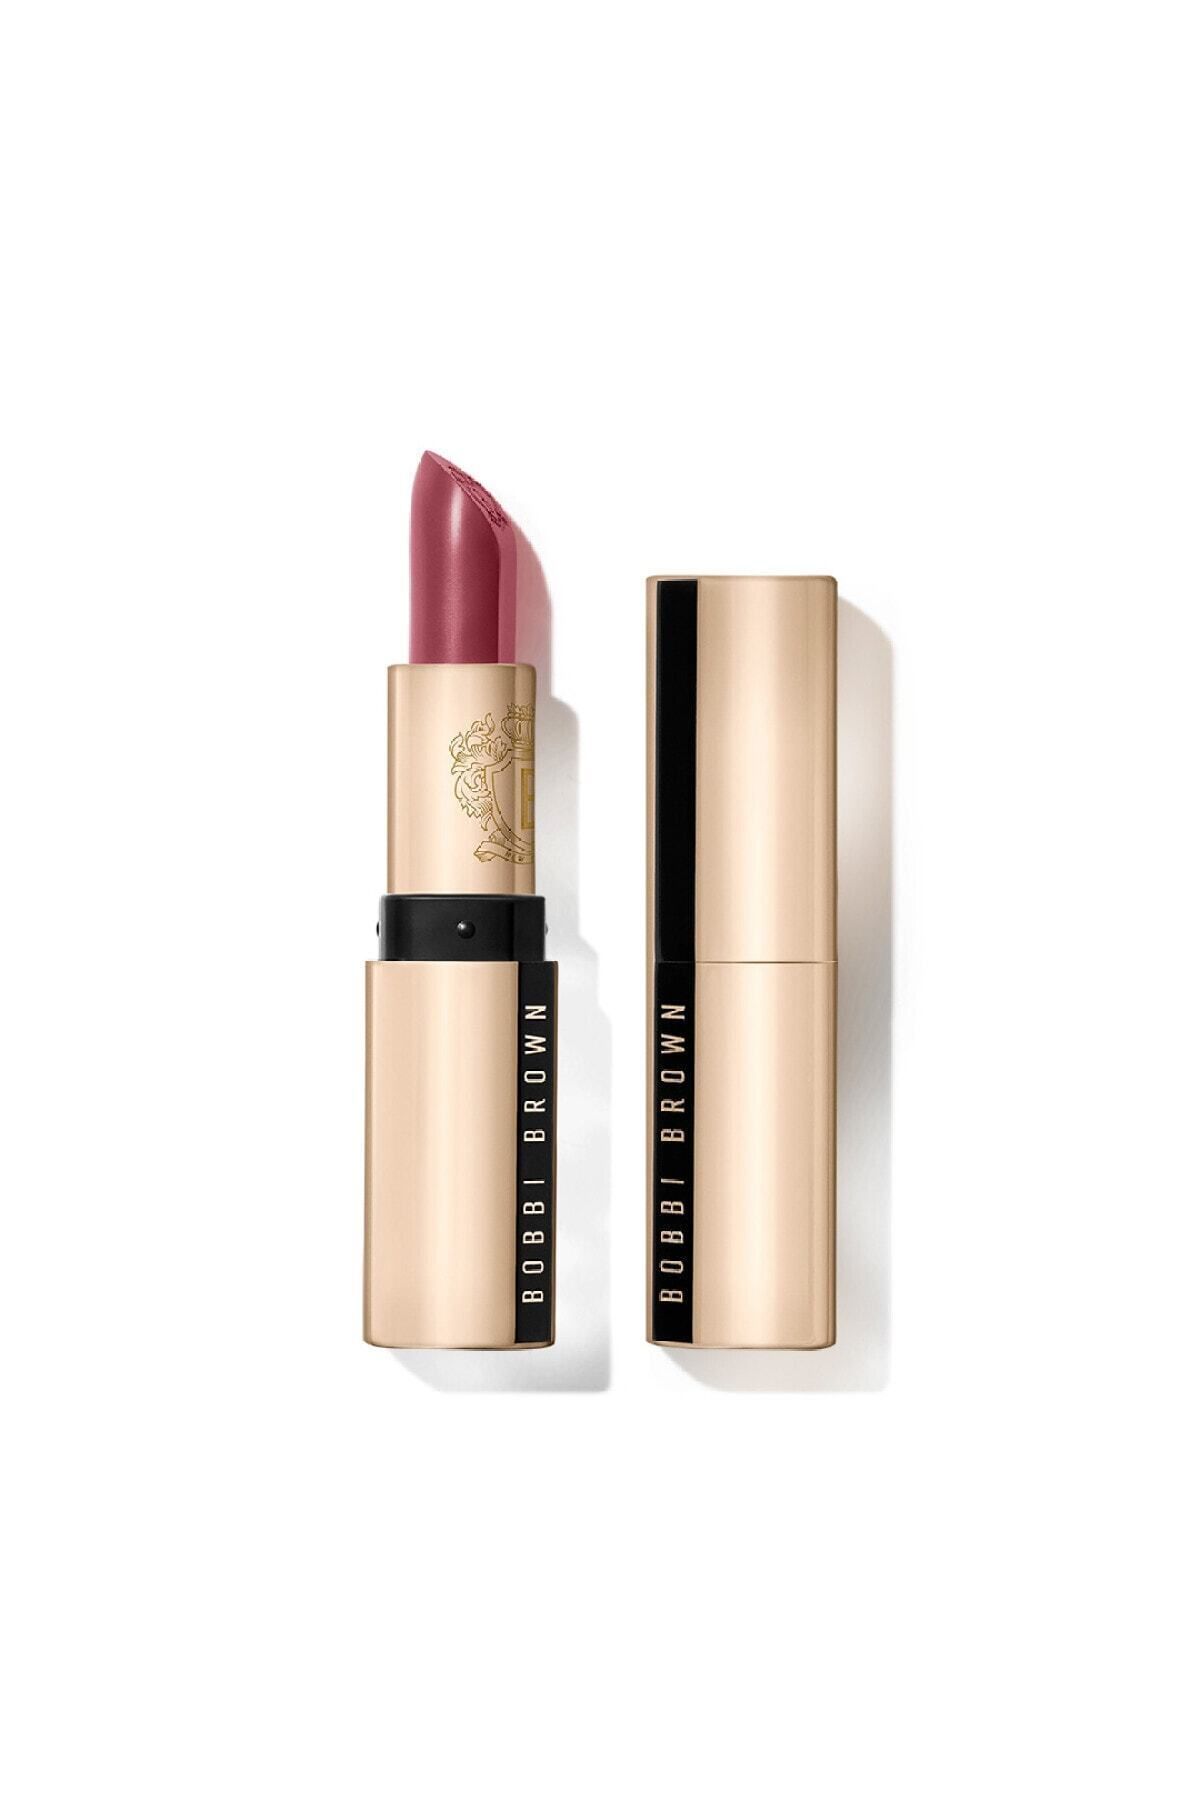 Bobbi Brown LUXE LİPSTİCK INTENSELY PİGMENTED SATİN FİNİSH LİPSTİCK - SOFT BERRY PSSN1363